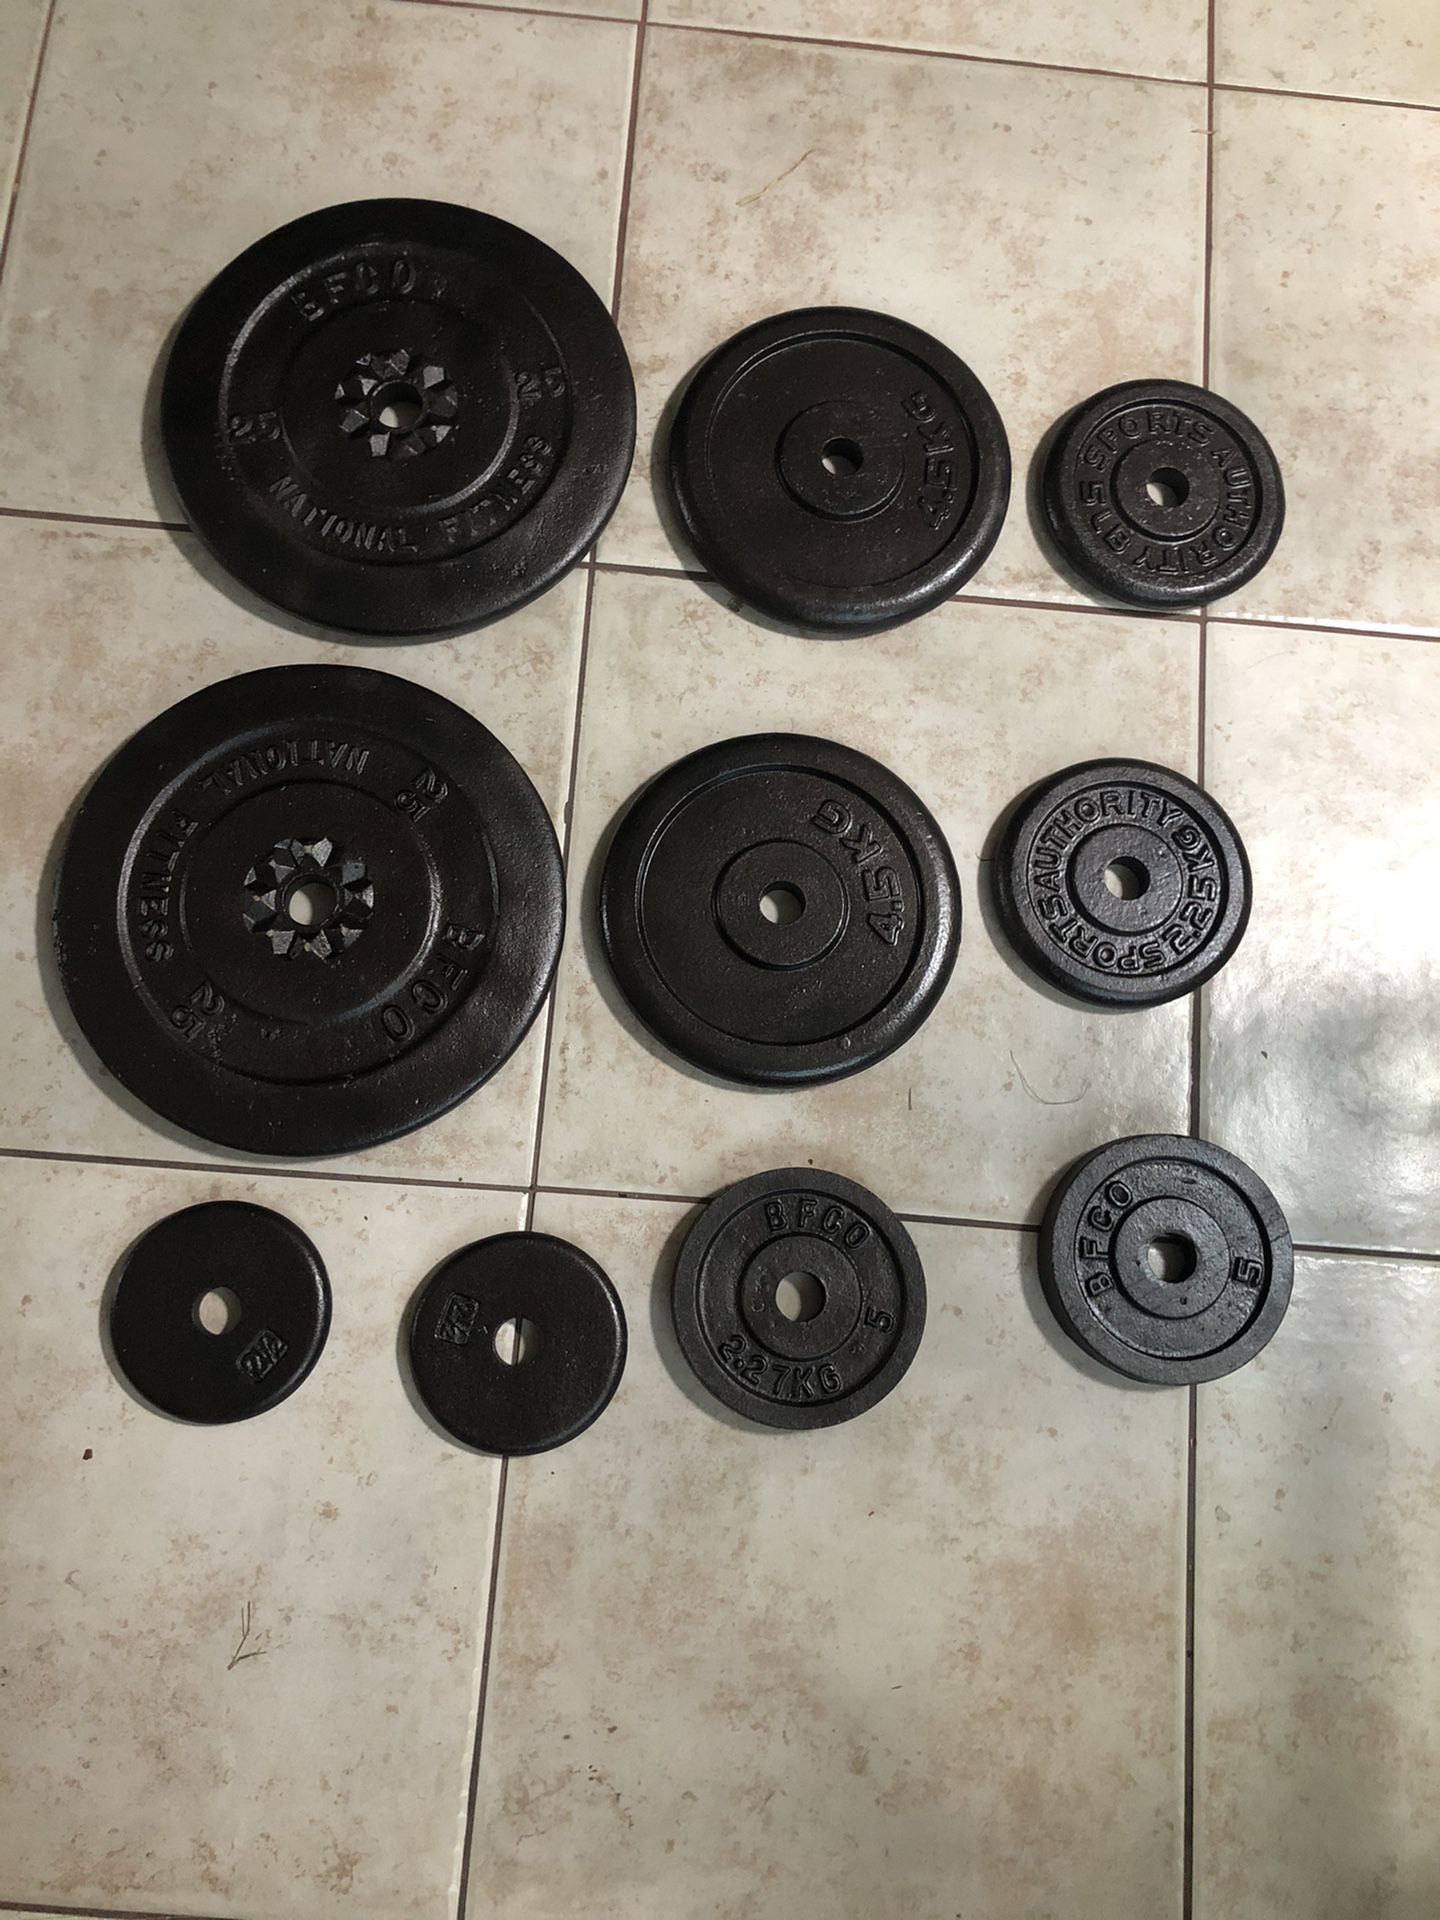 Standard 1 inch weights for barbell or dumbbells